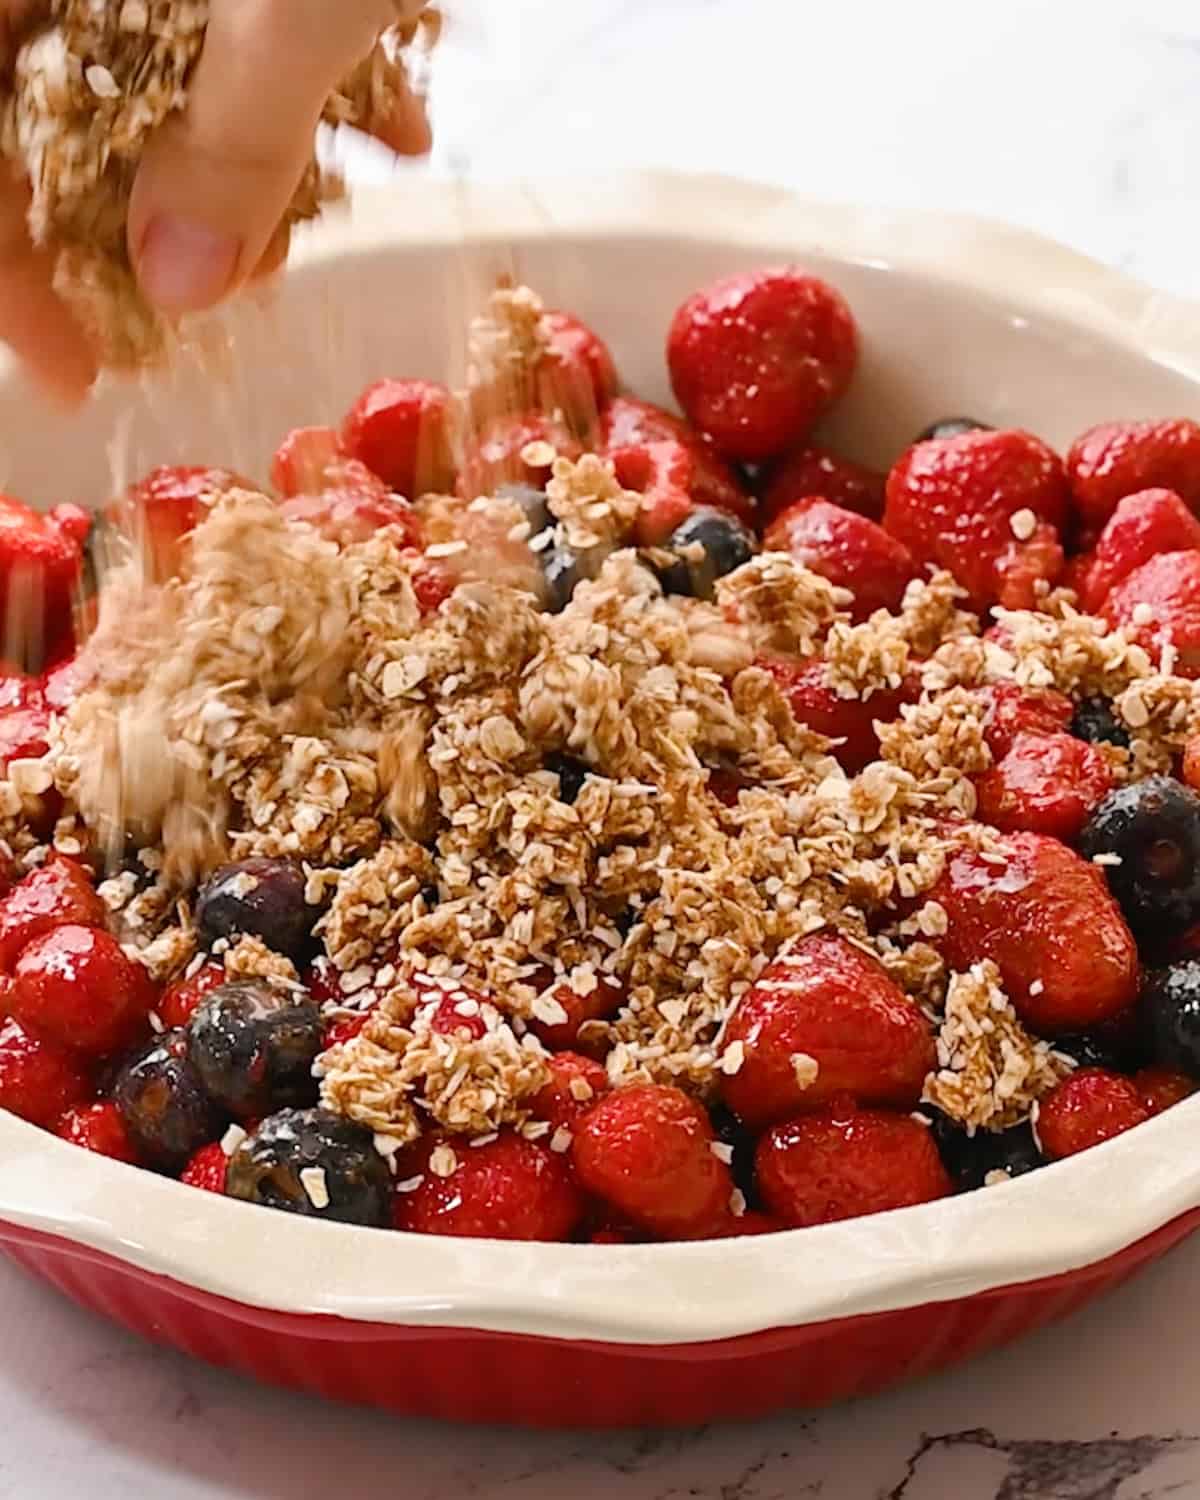 How to Make Healthy Berry Crisp -  topping being sprinkled on the berries in the pie dish